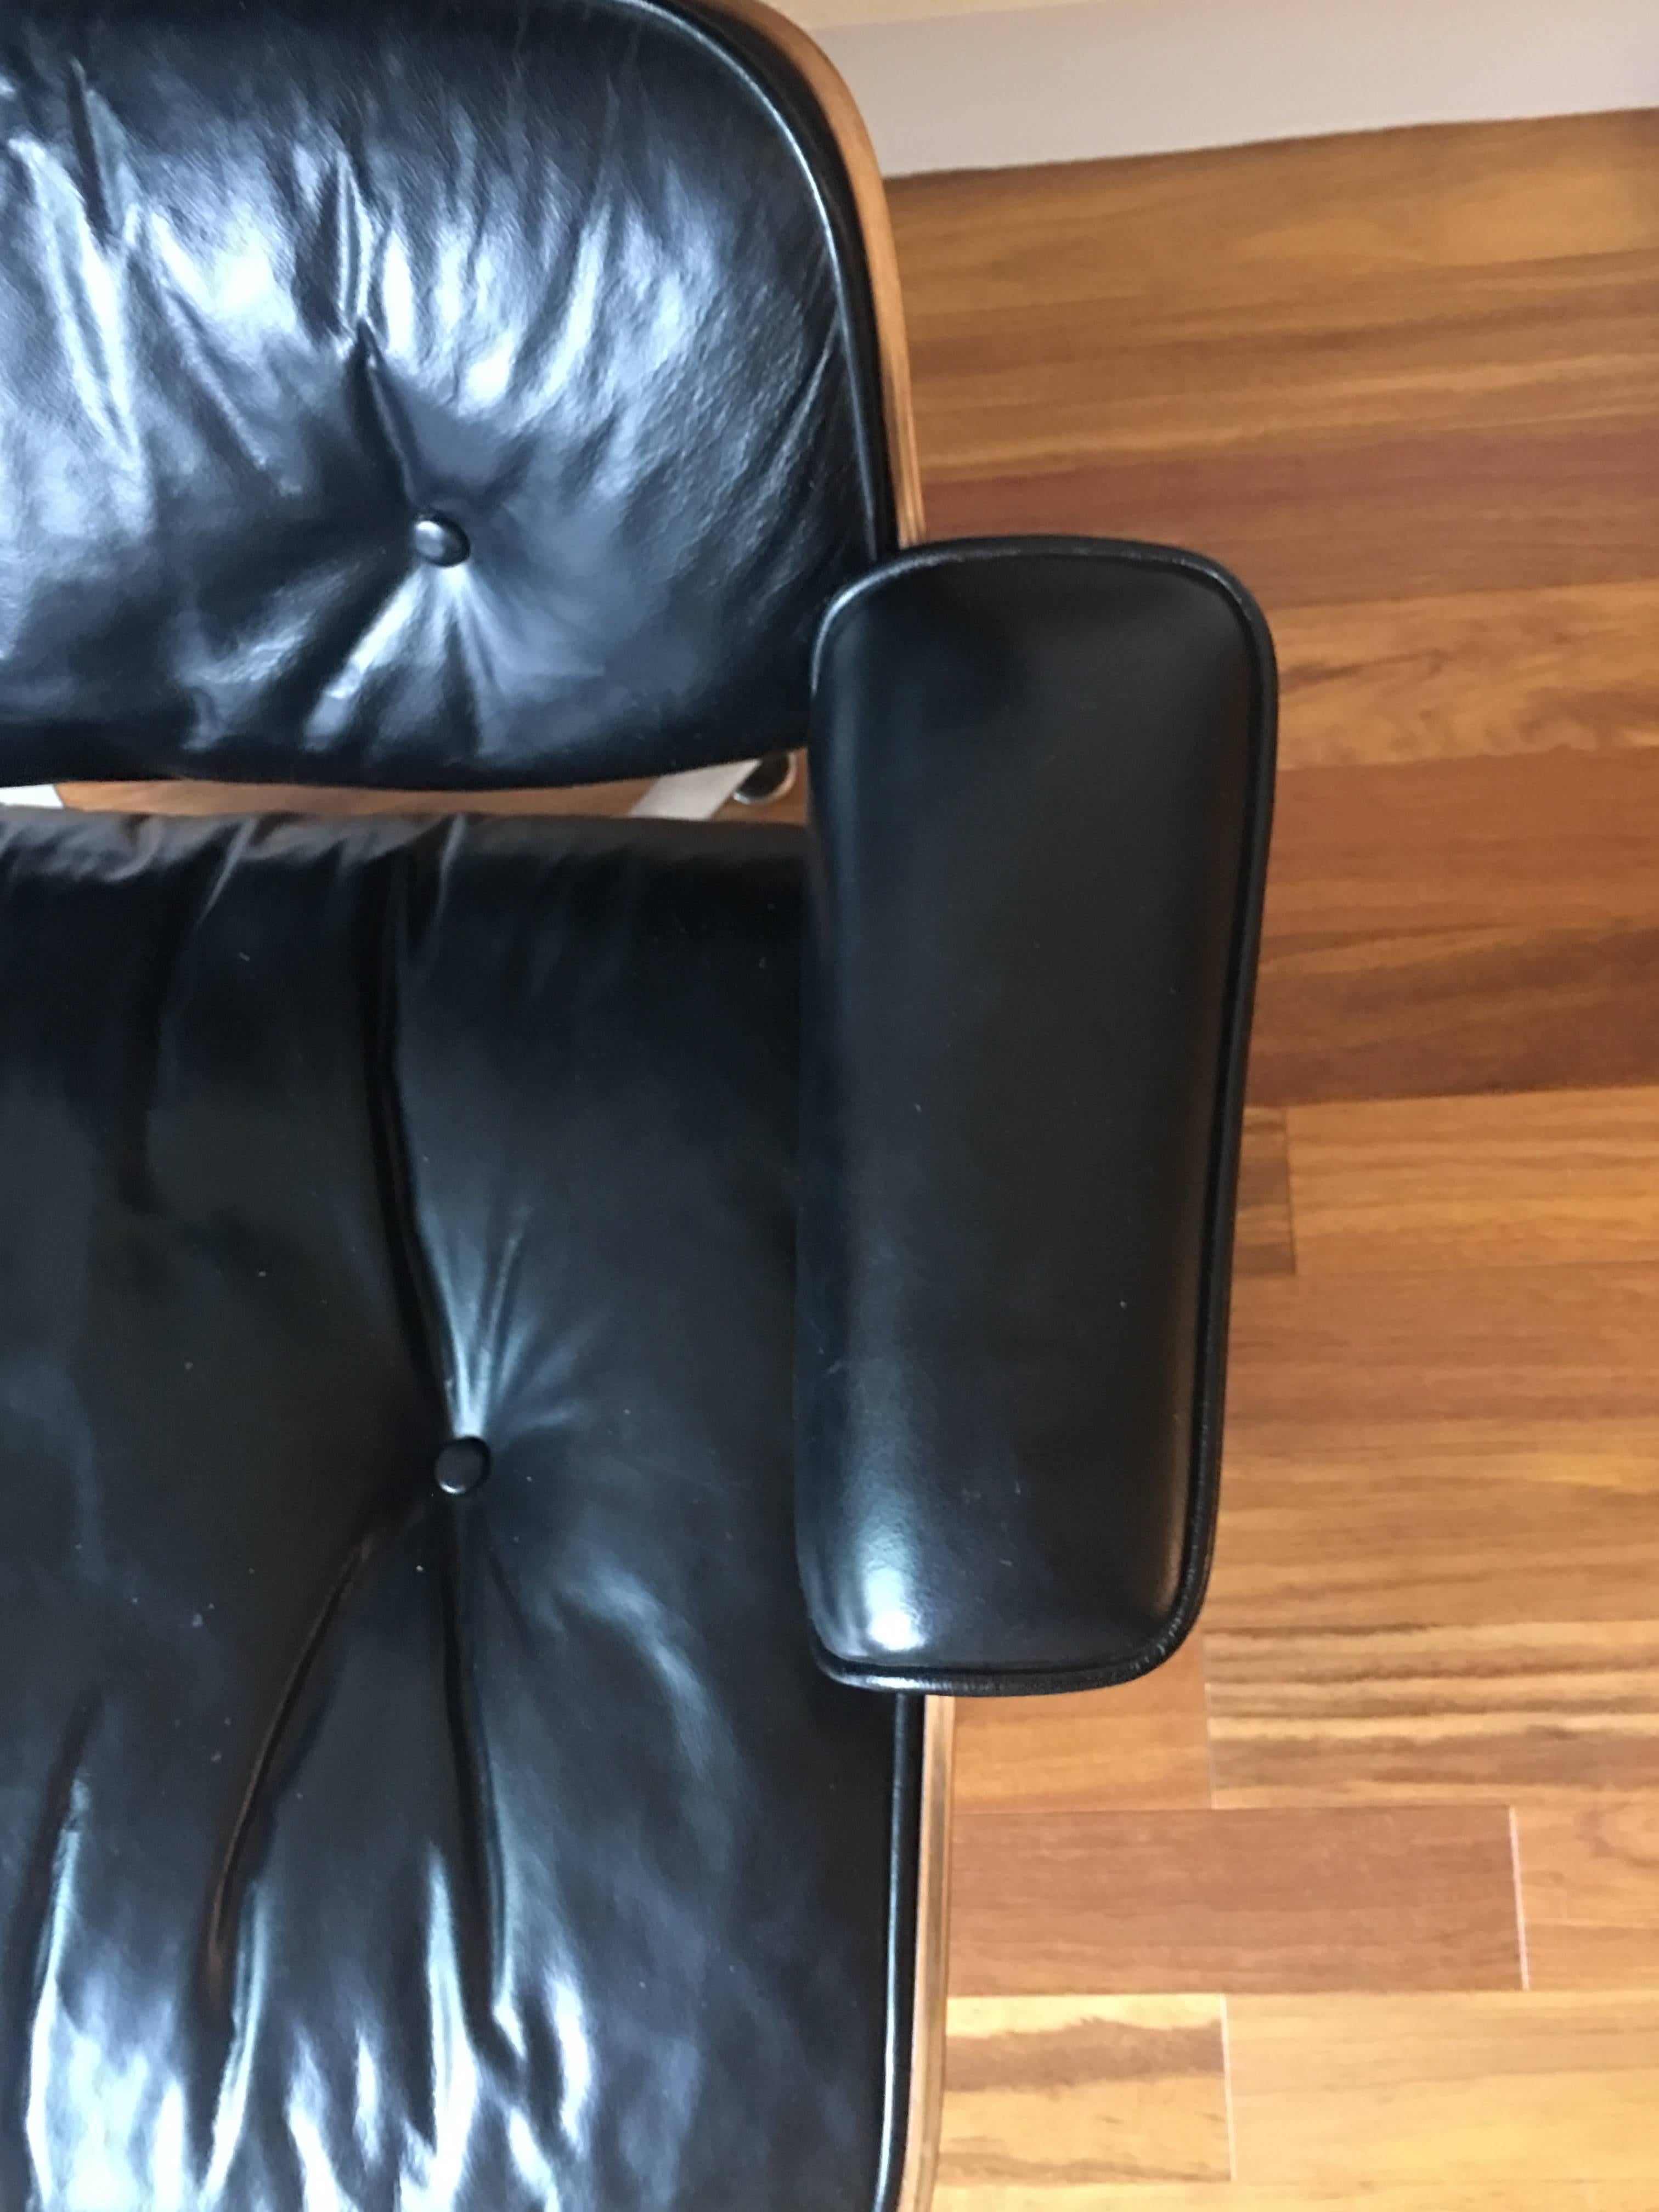 American Near Mint Condition 1960s Herman Miller Eames Lounge Chair and Ottoman